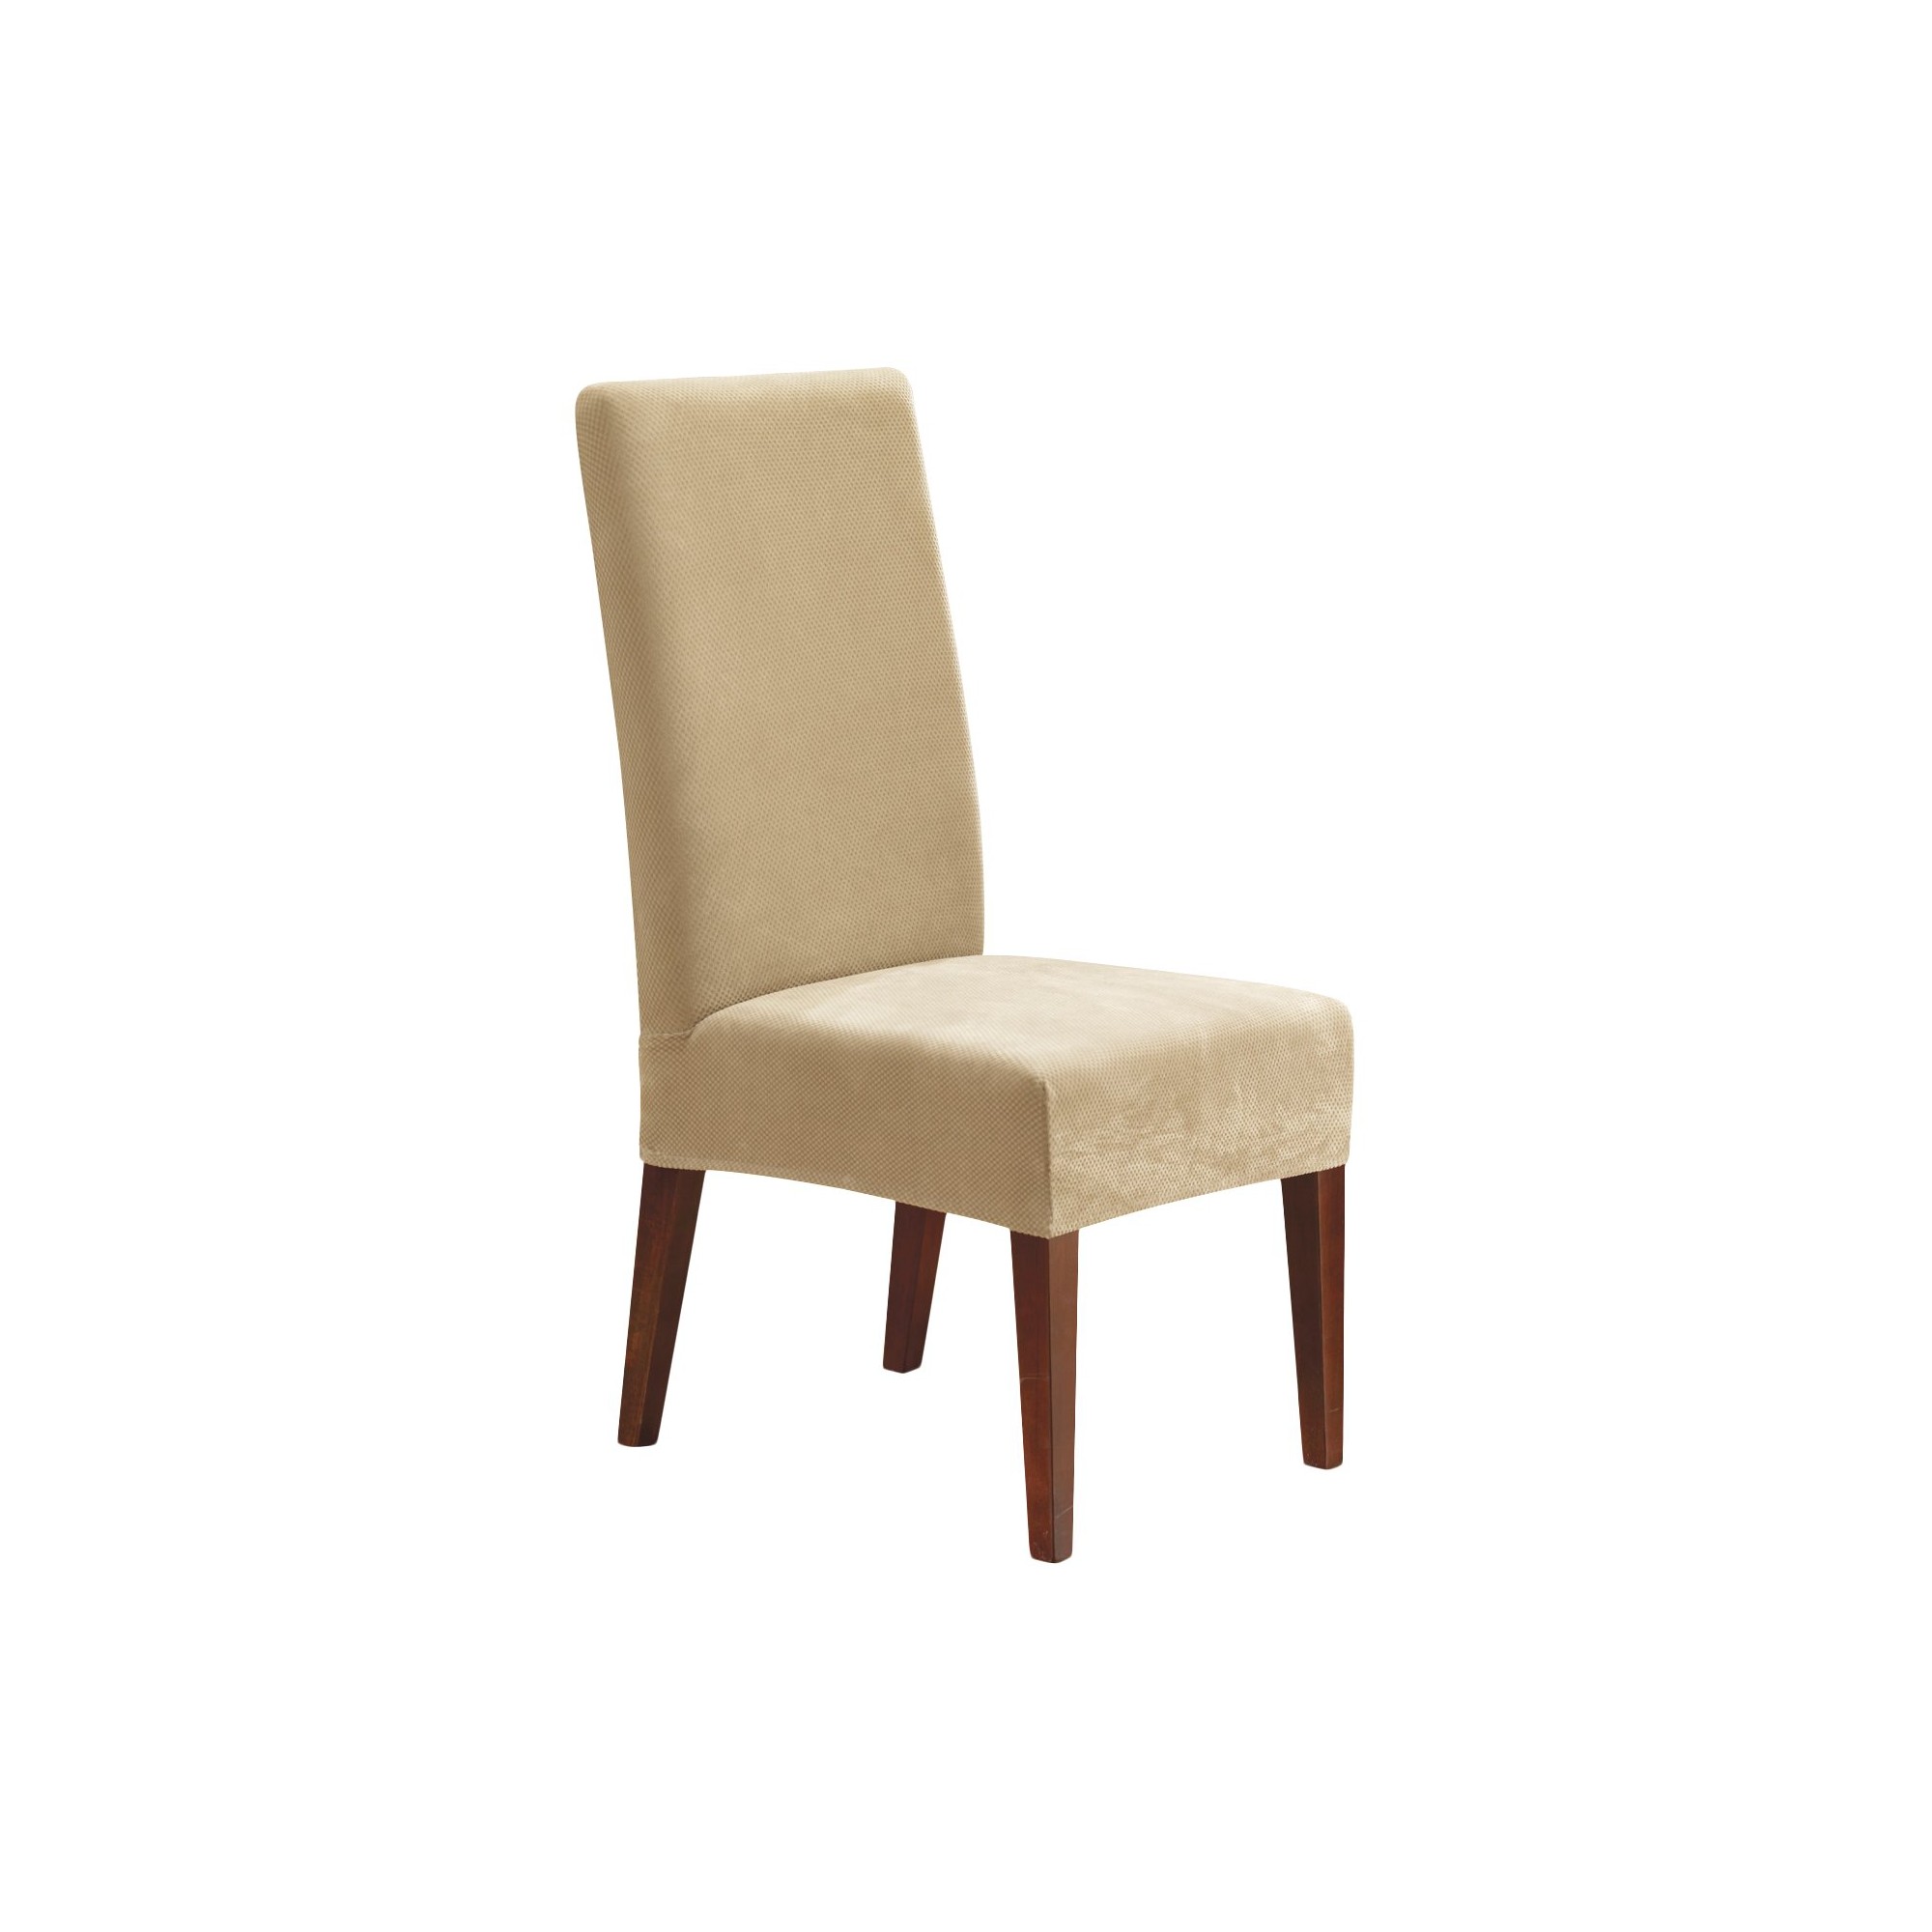 Stretch Pique Short Dining Chair Slipcover - Sure Fit, Ivory